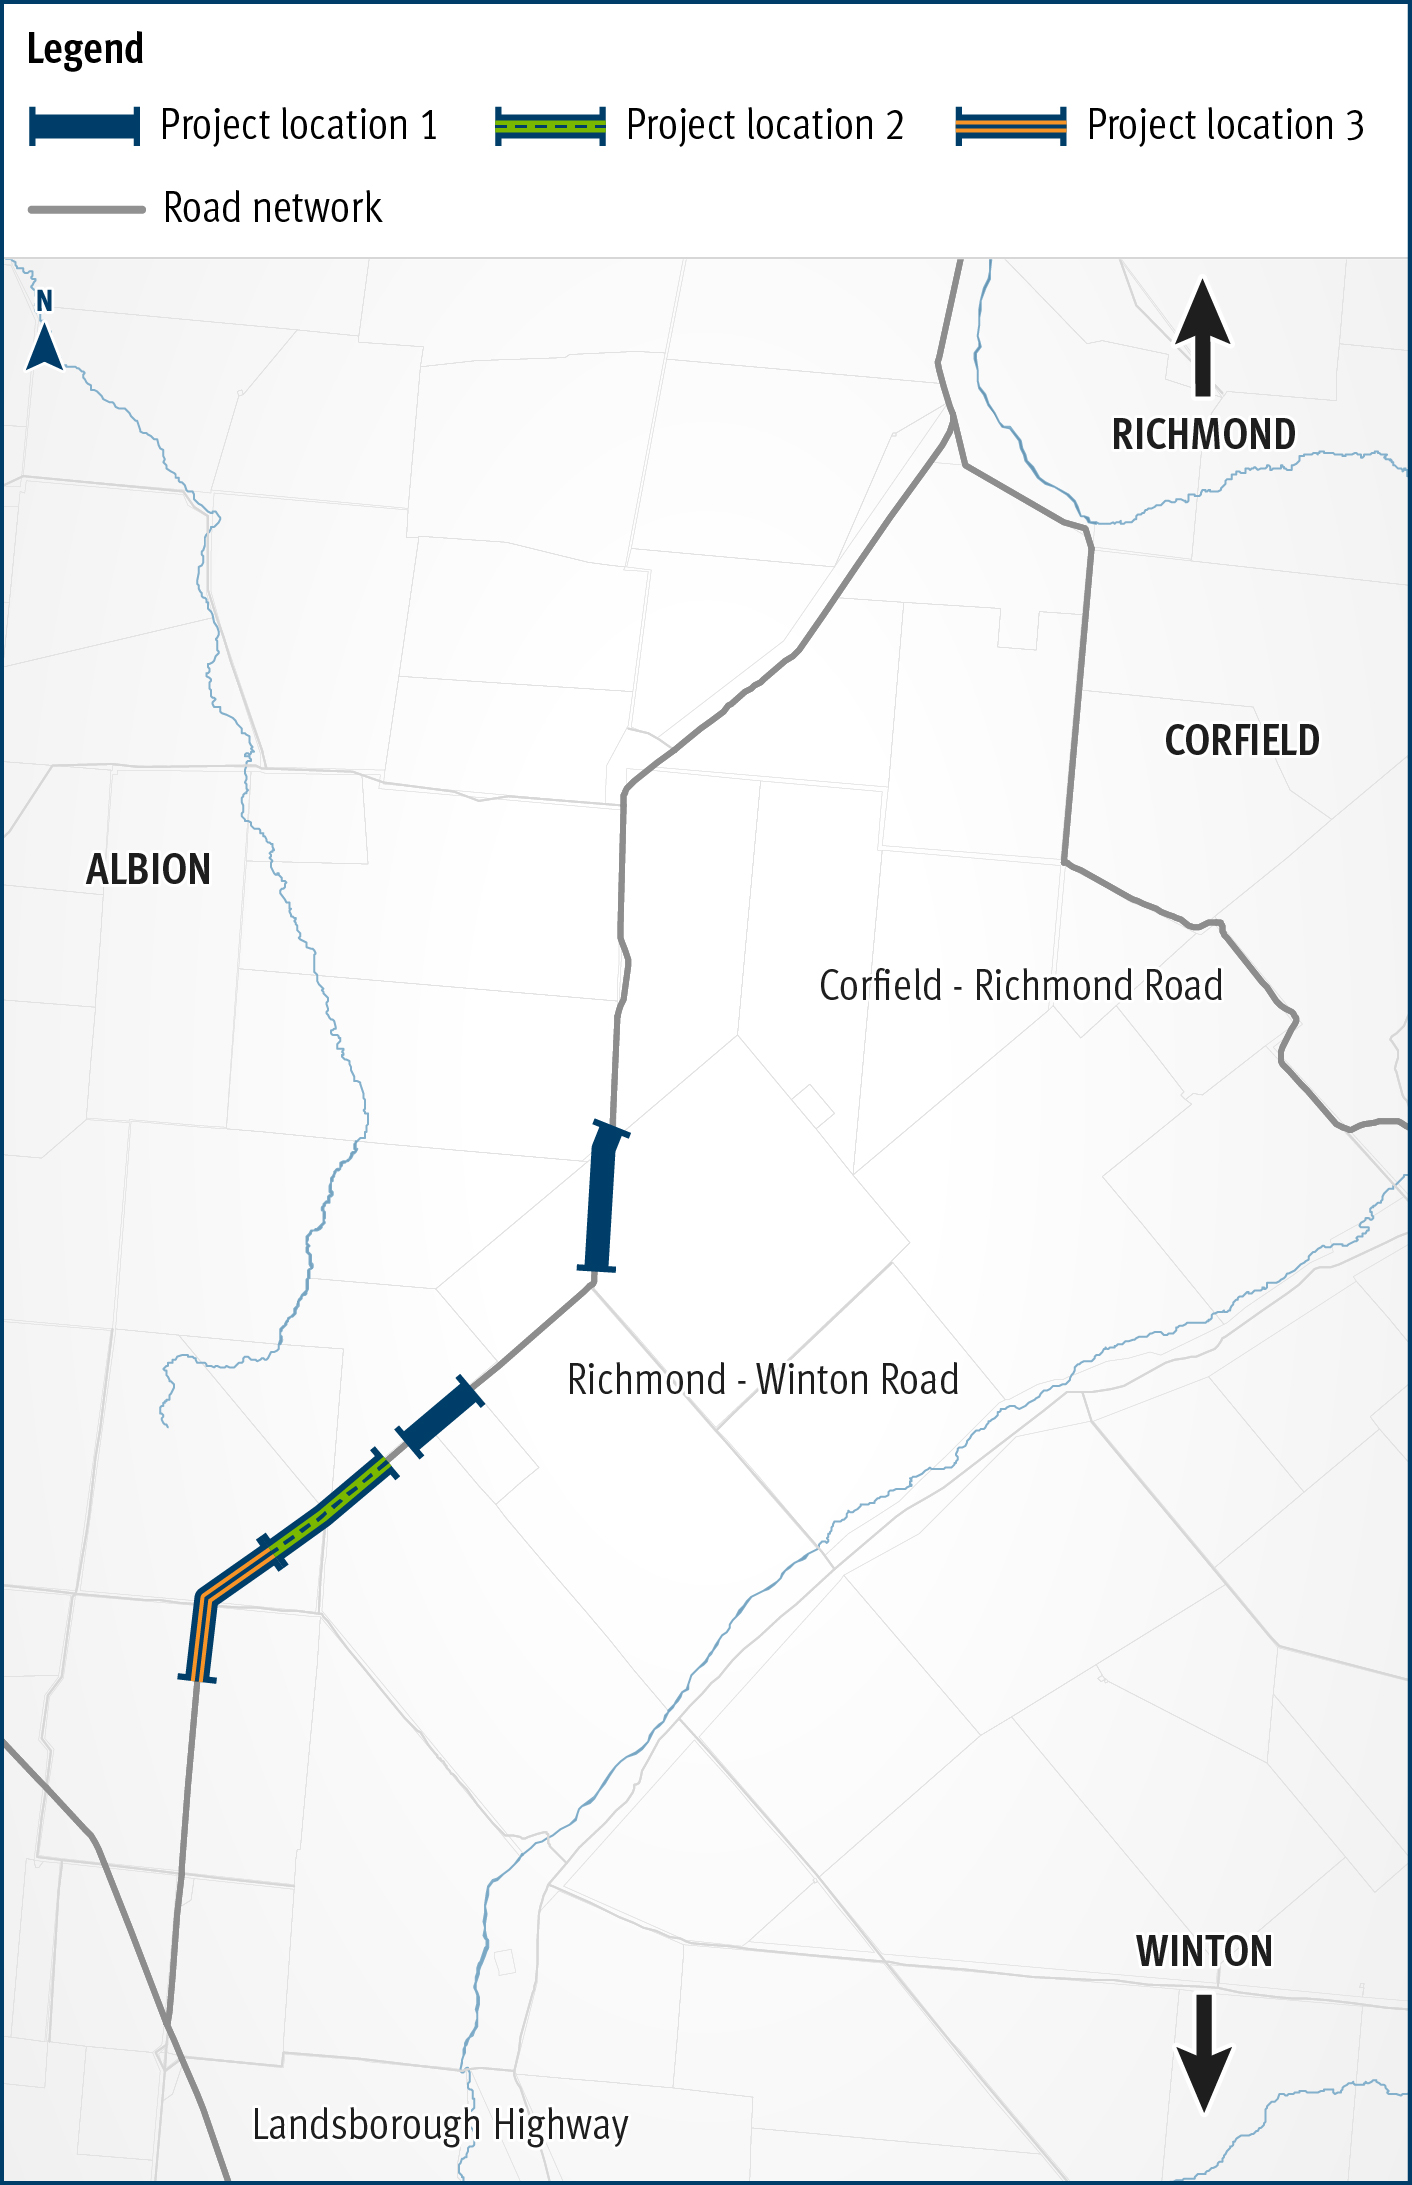 The map shows the locality of three separate projects on the Richmond-Winton Road delivered as part of a progressive approach to sealing this road. The road is located between Richmond and Winton in western Queensland, with the three projects closest to Winton. Project location 1 is shown by a solid blue line. Project location 2 is shown by a green line with a broken blue line in the centre. Project location 3 is shown by an orange line with a blue line in the centre. The surrounding road network, including the Landsborough Highway and local government owned Corfield-Richmond Road are also shown on the map.